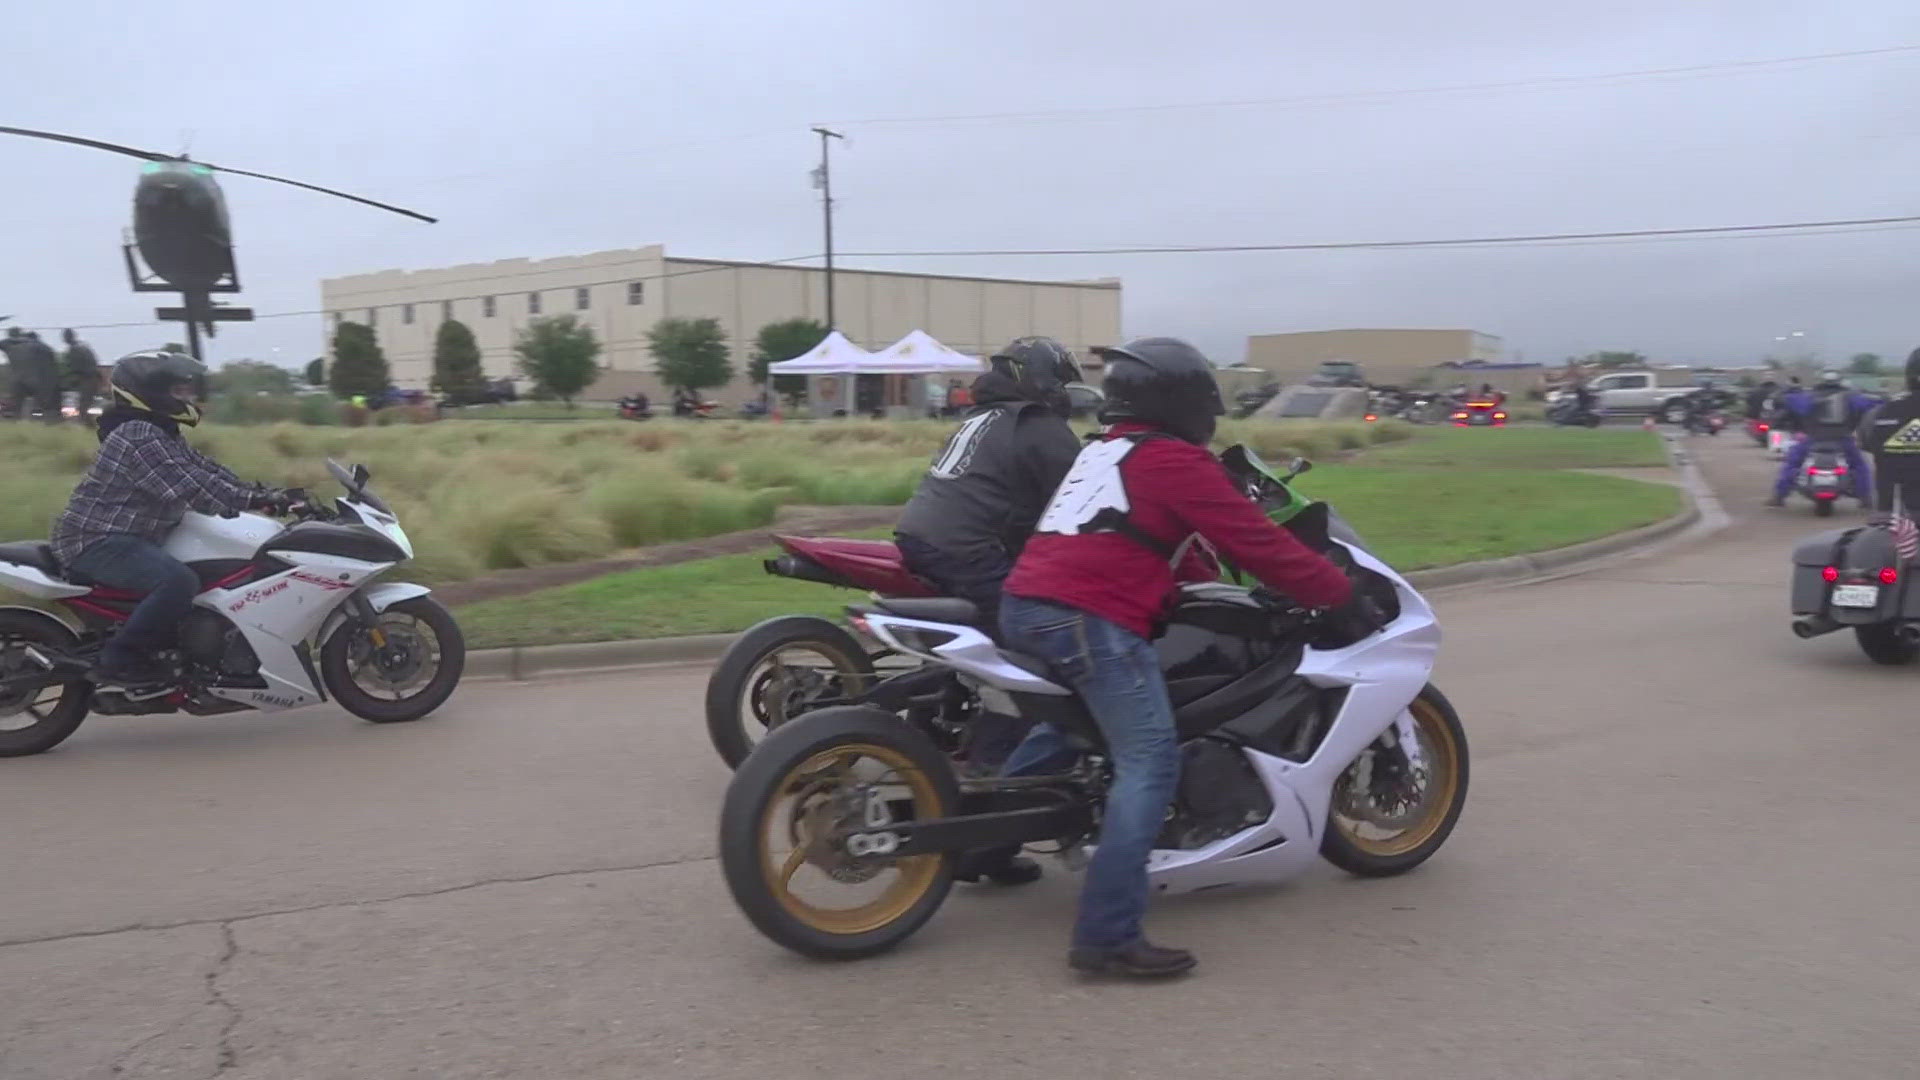 TXDOT speaks on what drivers and motorcyclists can do to help prevent motorcycle crashes.